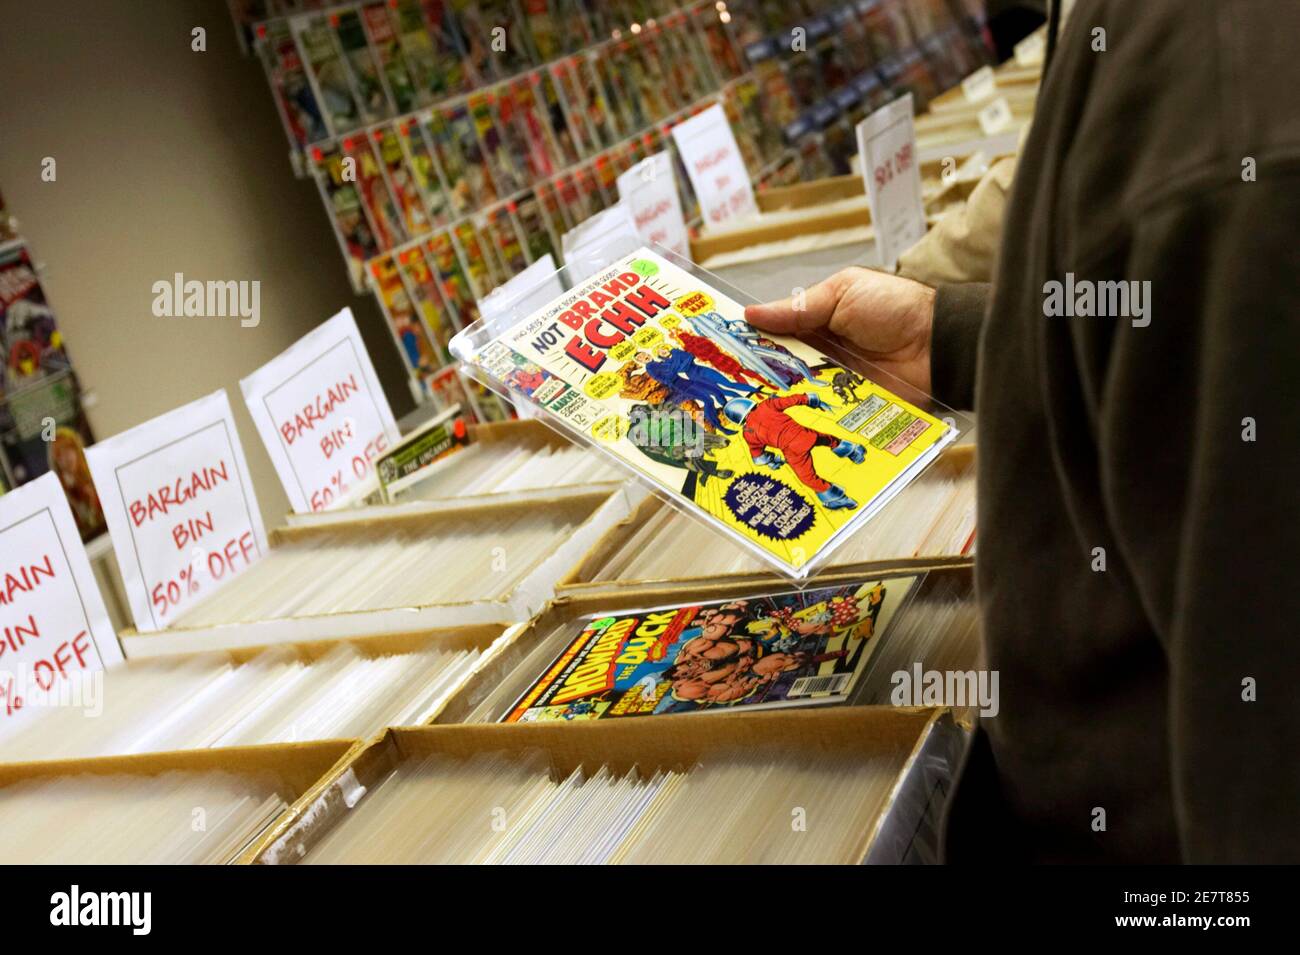 A man shops for comic books at the Penn Plaza Pavilion in New York November 17, 2007. The hotel and adjacent Penn Plaza Pavilion are hosting a three day Big Apple Comic Book, Art, Toy & Sci-Fi Expo, billed as the oldest and longest running Comic, Art and Toy, Sci-Fi show of its kind in New York. REUTERS/Jacob Silberberg (UNITED STATES) Stock Photo